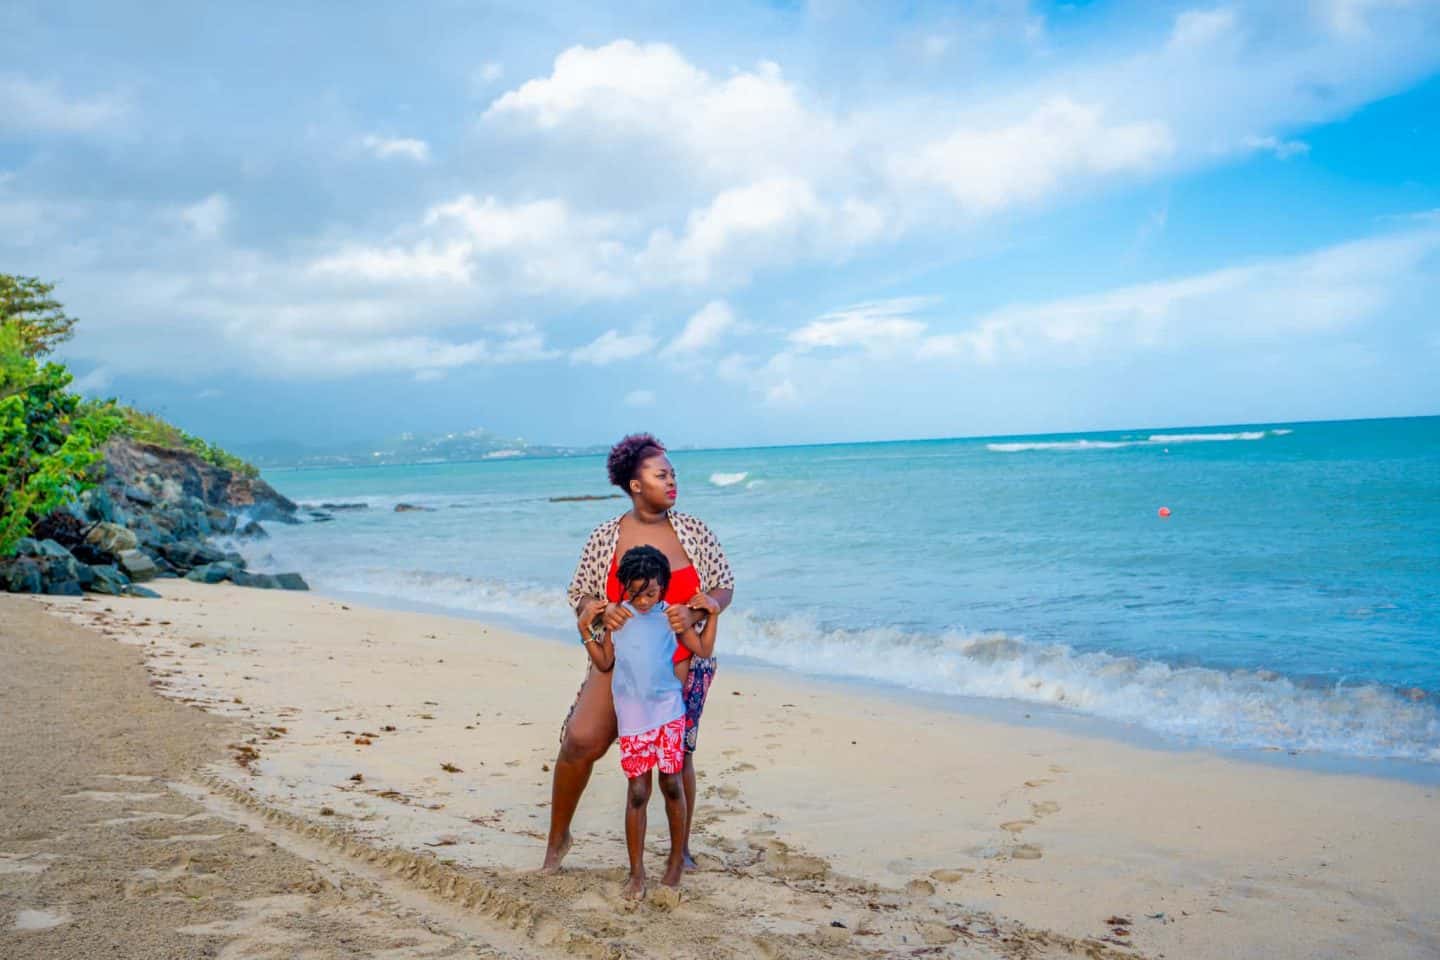 Black Family Travel Things To Do In St Croix Black Family Travel Black Travelers Black Kids Travel Black Family Traveling The World Black Worldschoolers African American Family 24